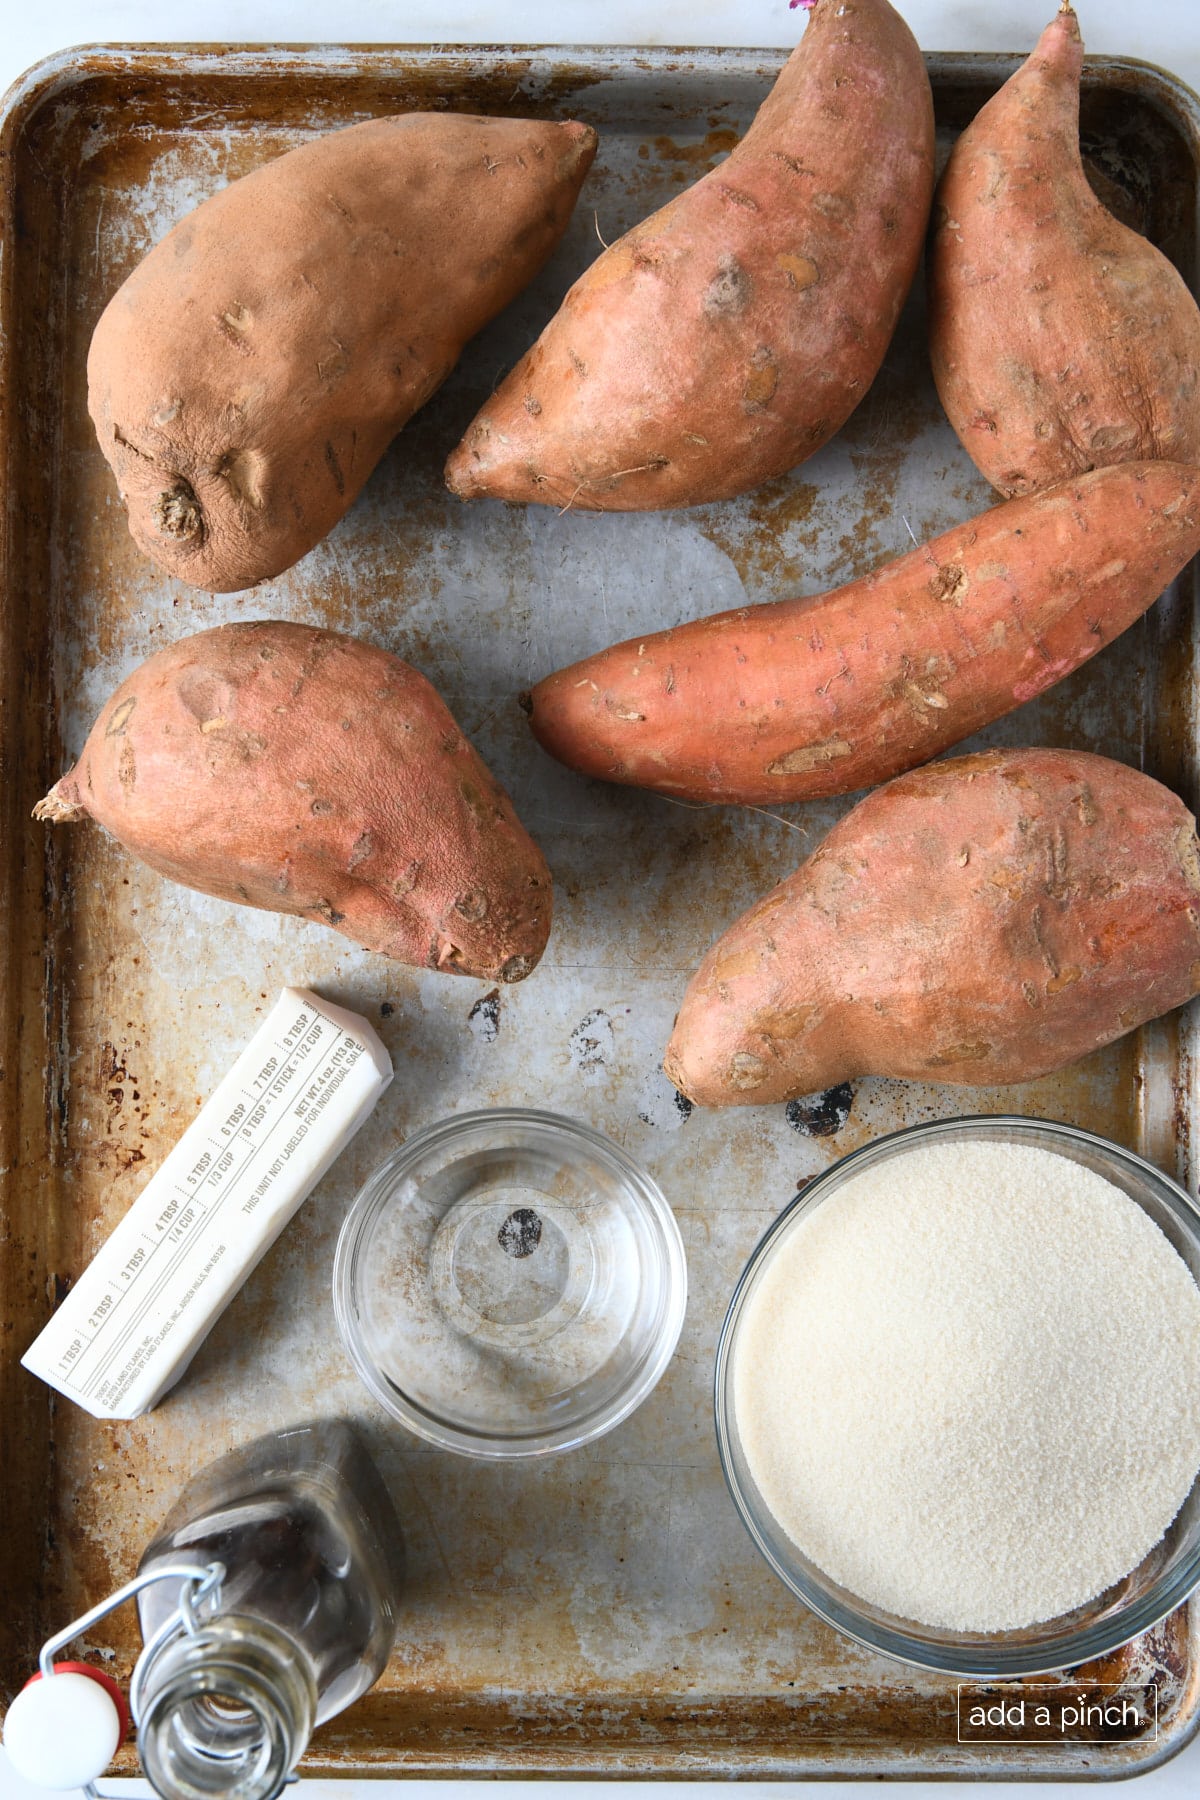 Ingredients used to make candied sweet potatoes on a baking sheet: sweet potatoes, butter, water, vanilla extract, and sugar.